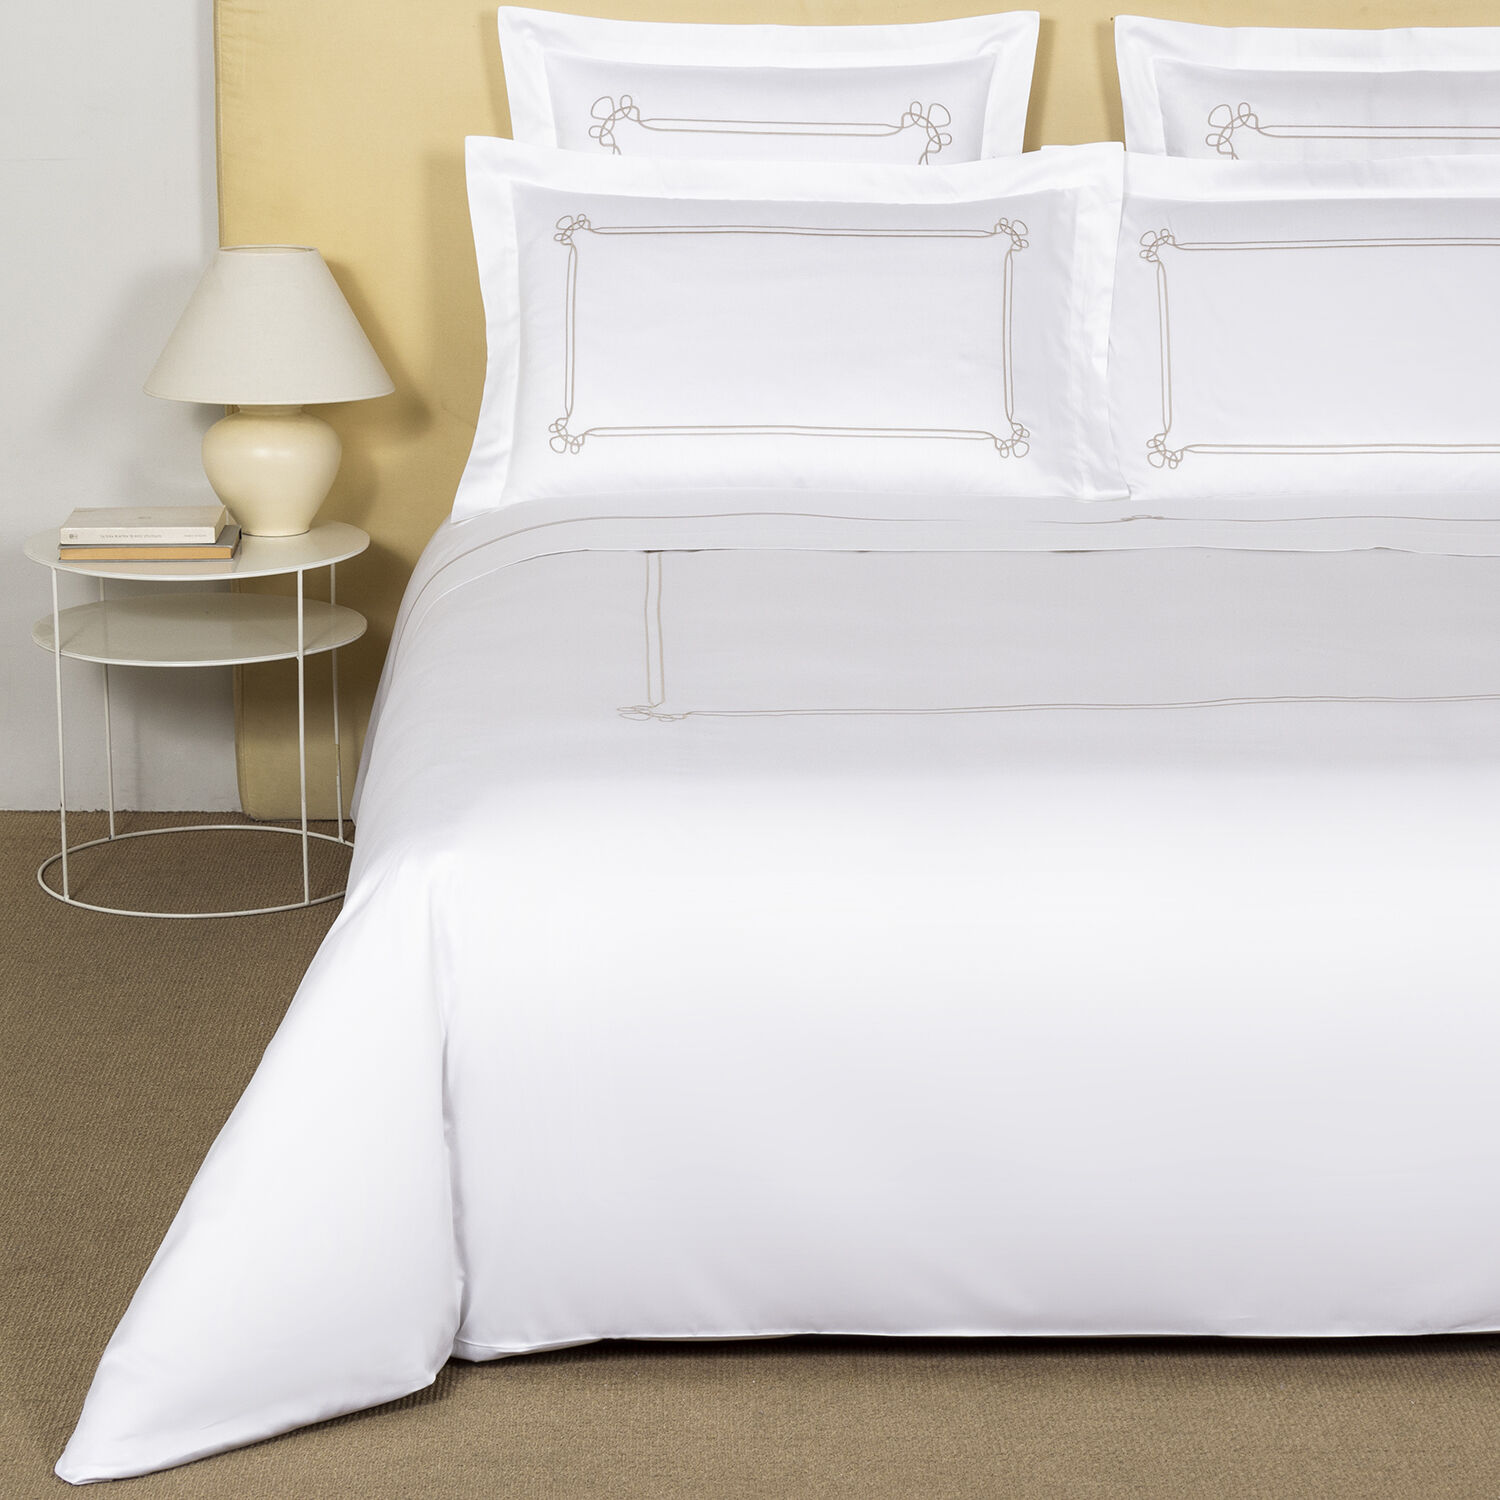 slide 1 Sirmione Embroidered Duvet Cover